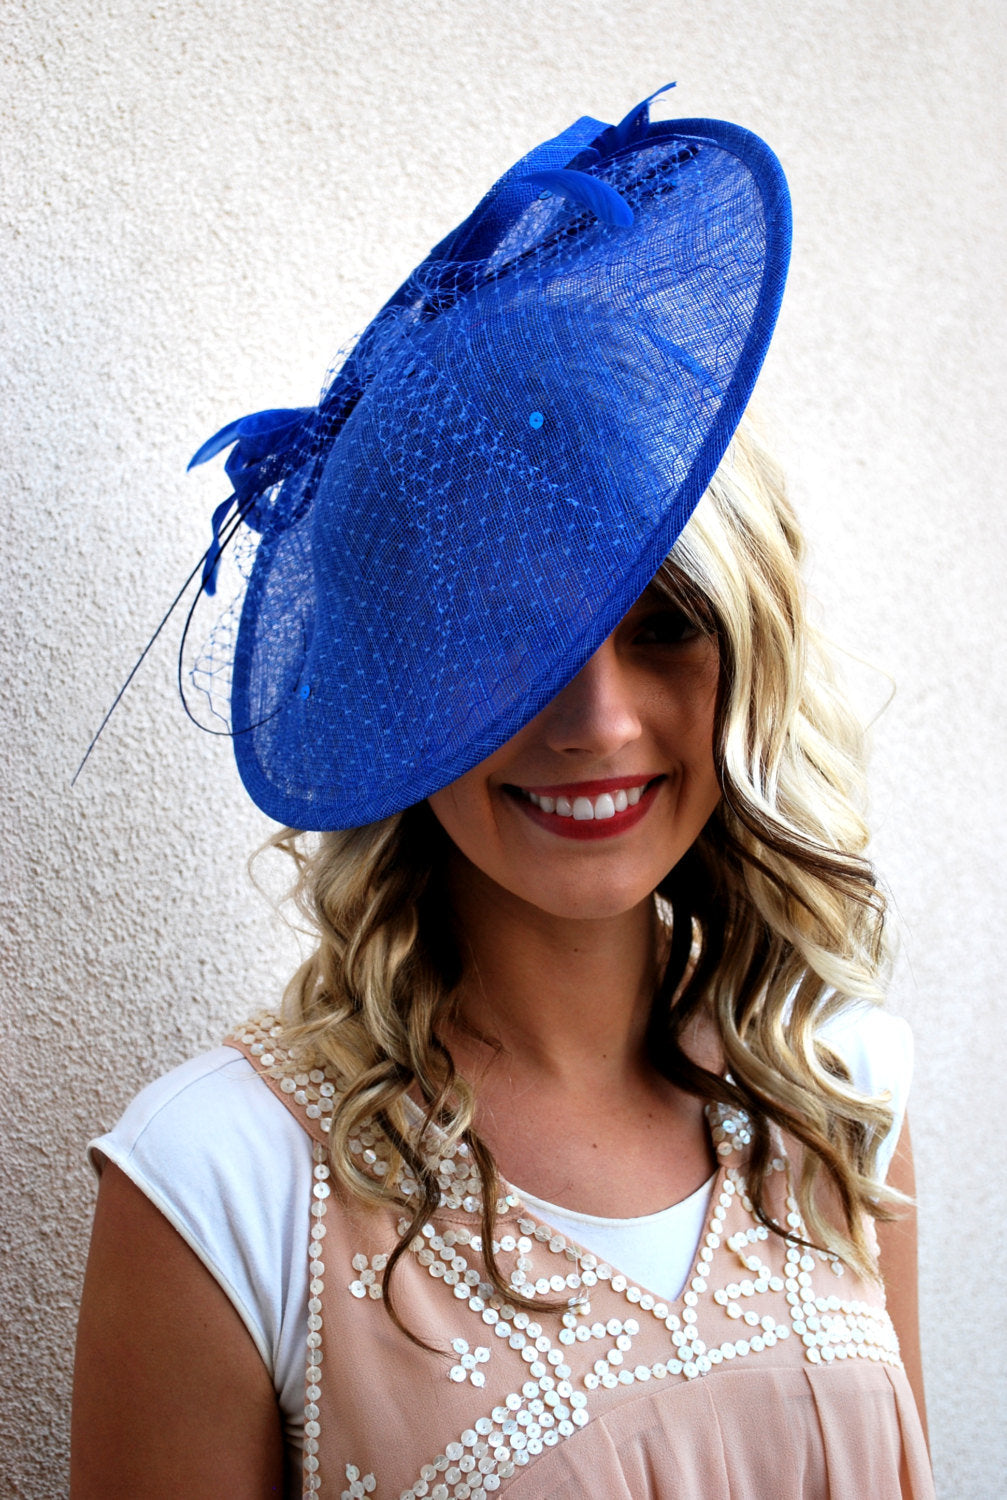 Royal Blue Fascinator Derby Hat on Headband, several colors avail, Church Hat, Derby Hat, Fancy Hat, Royal Hat, Tea Party Hat, wedding hat